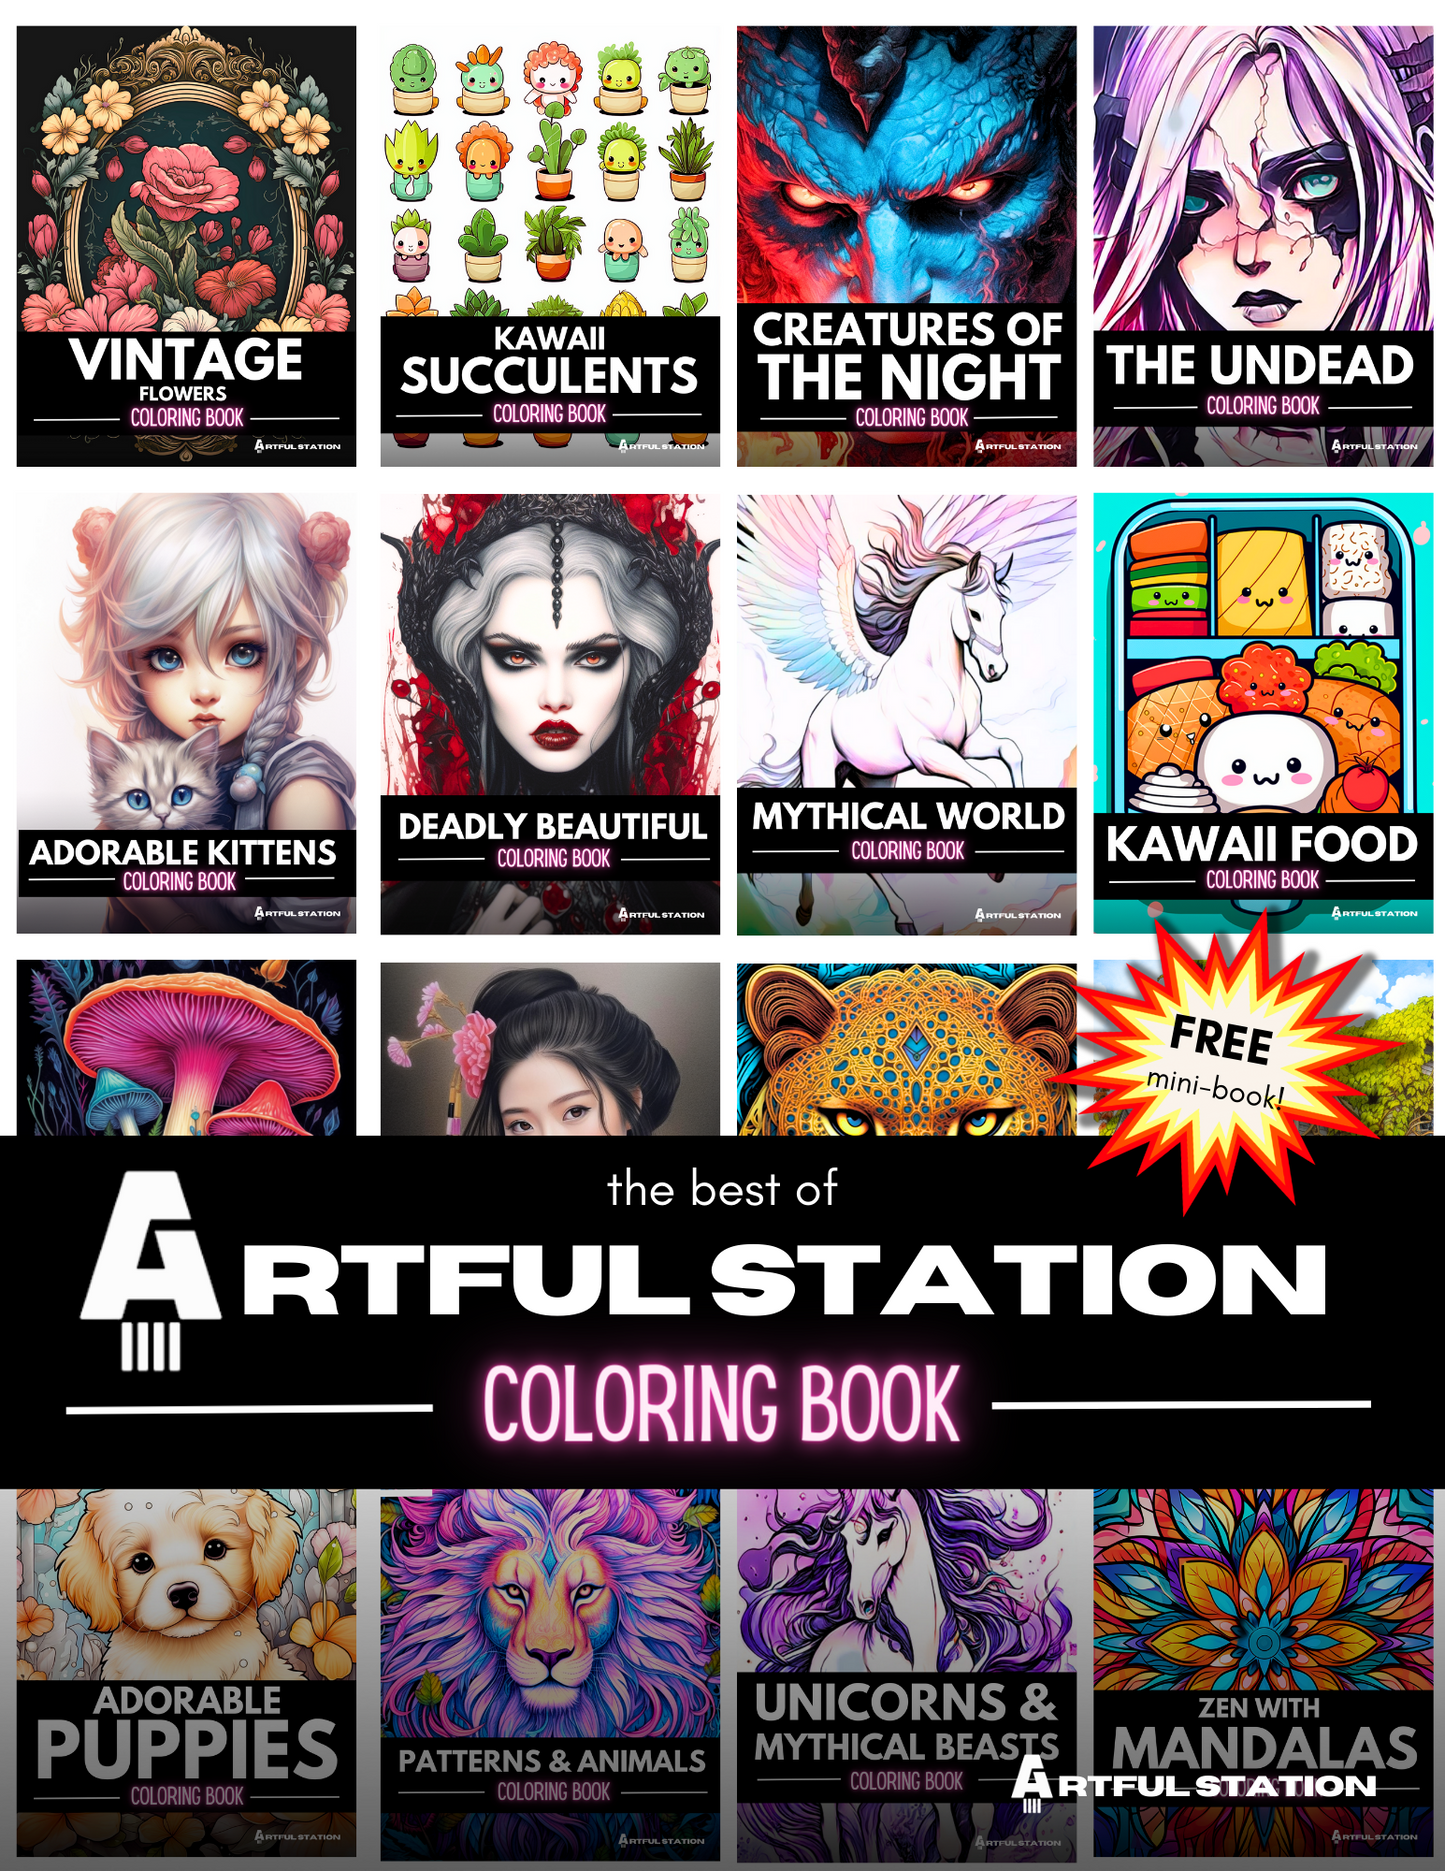 Best of Artful Station *FREE BOOK*